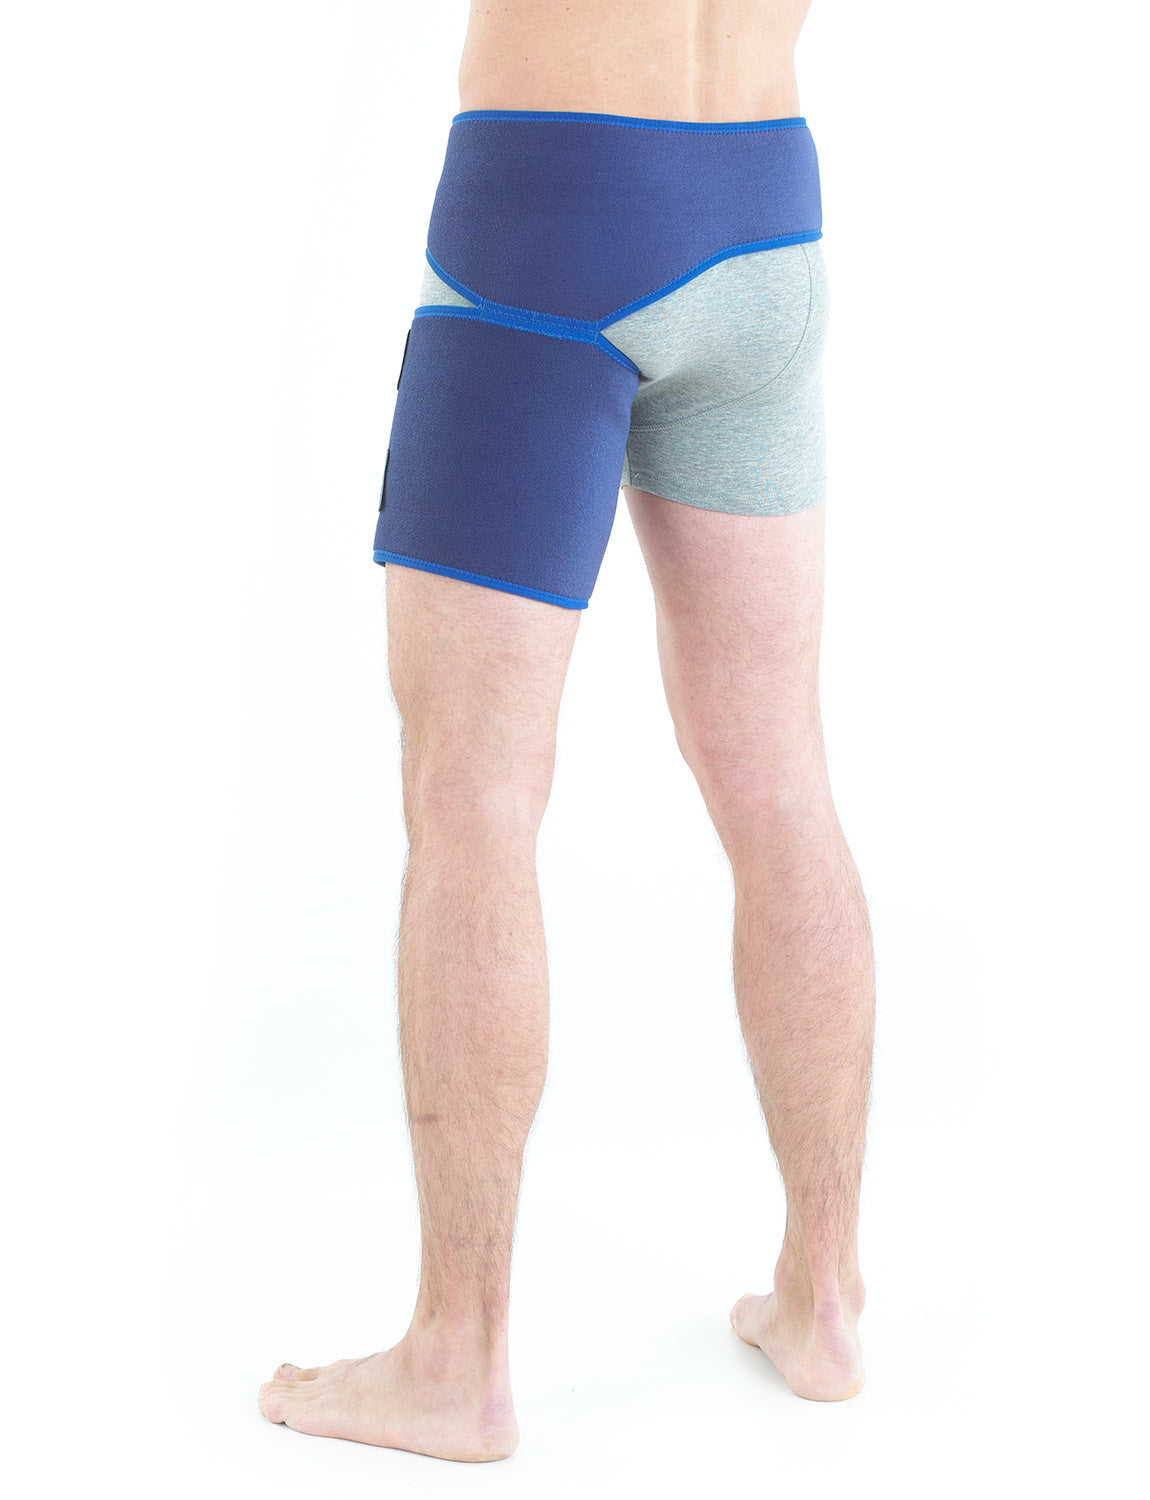 Compression Shorts with Groin Wrap - Ultima Material